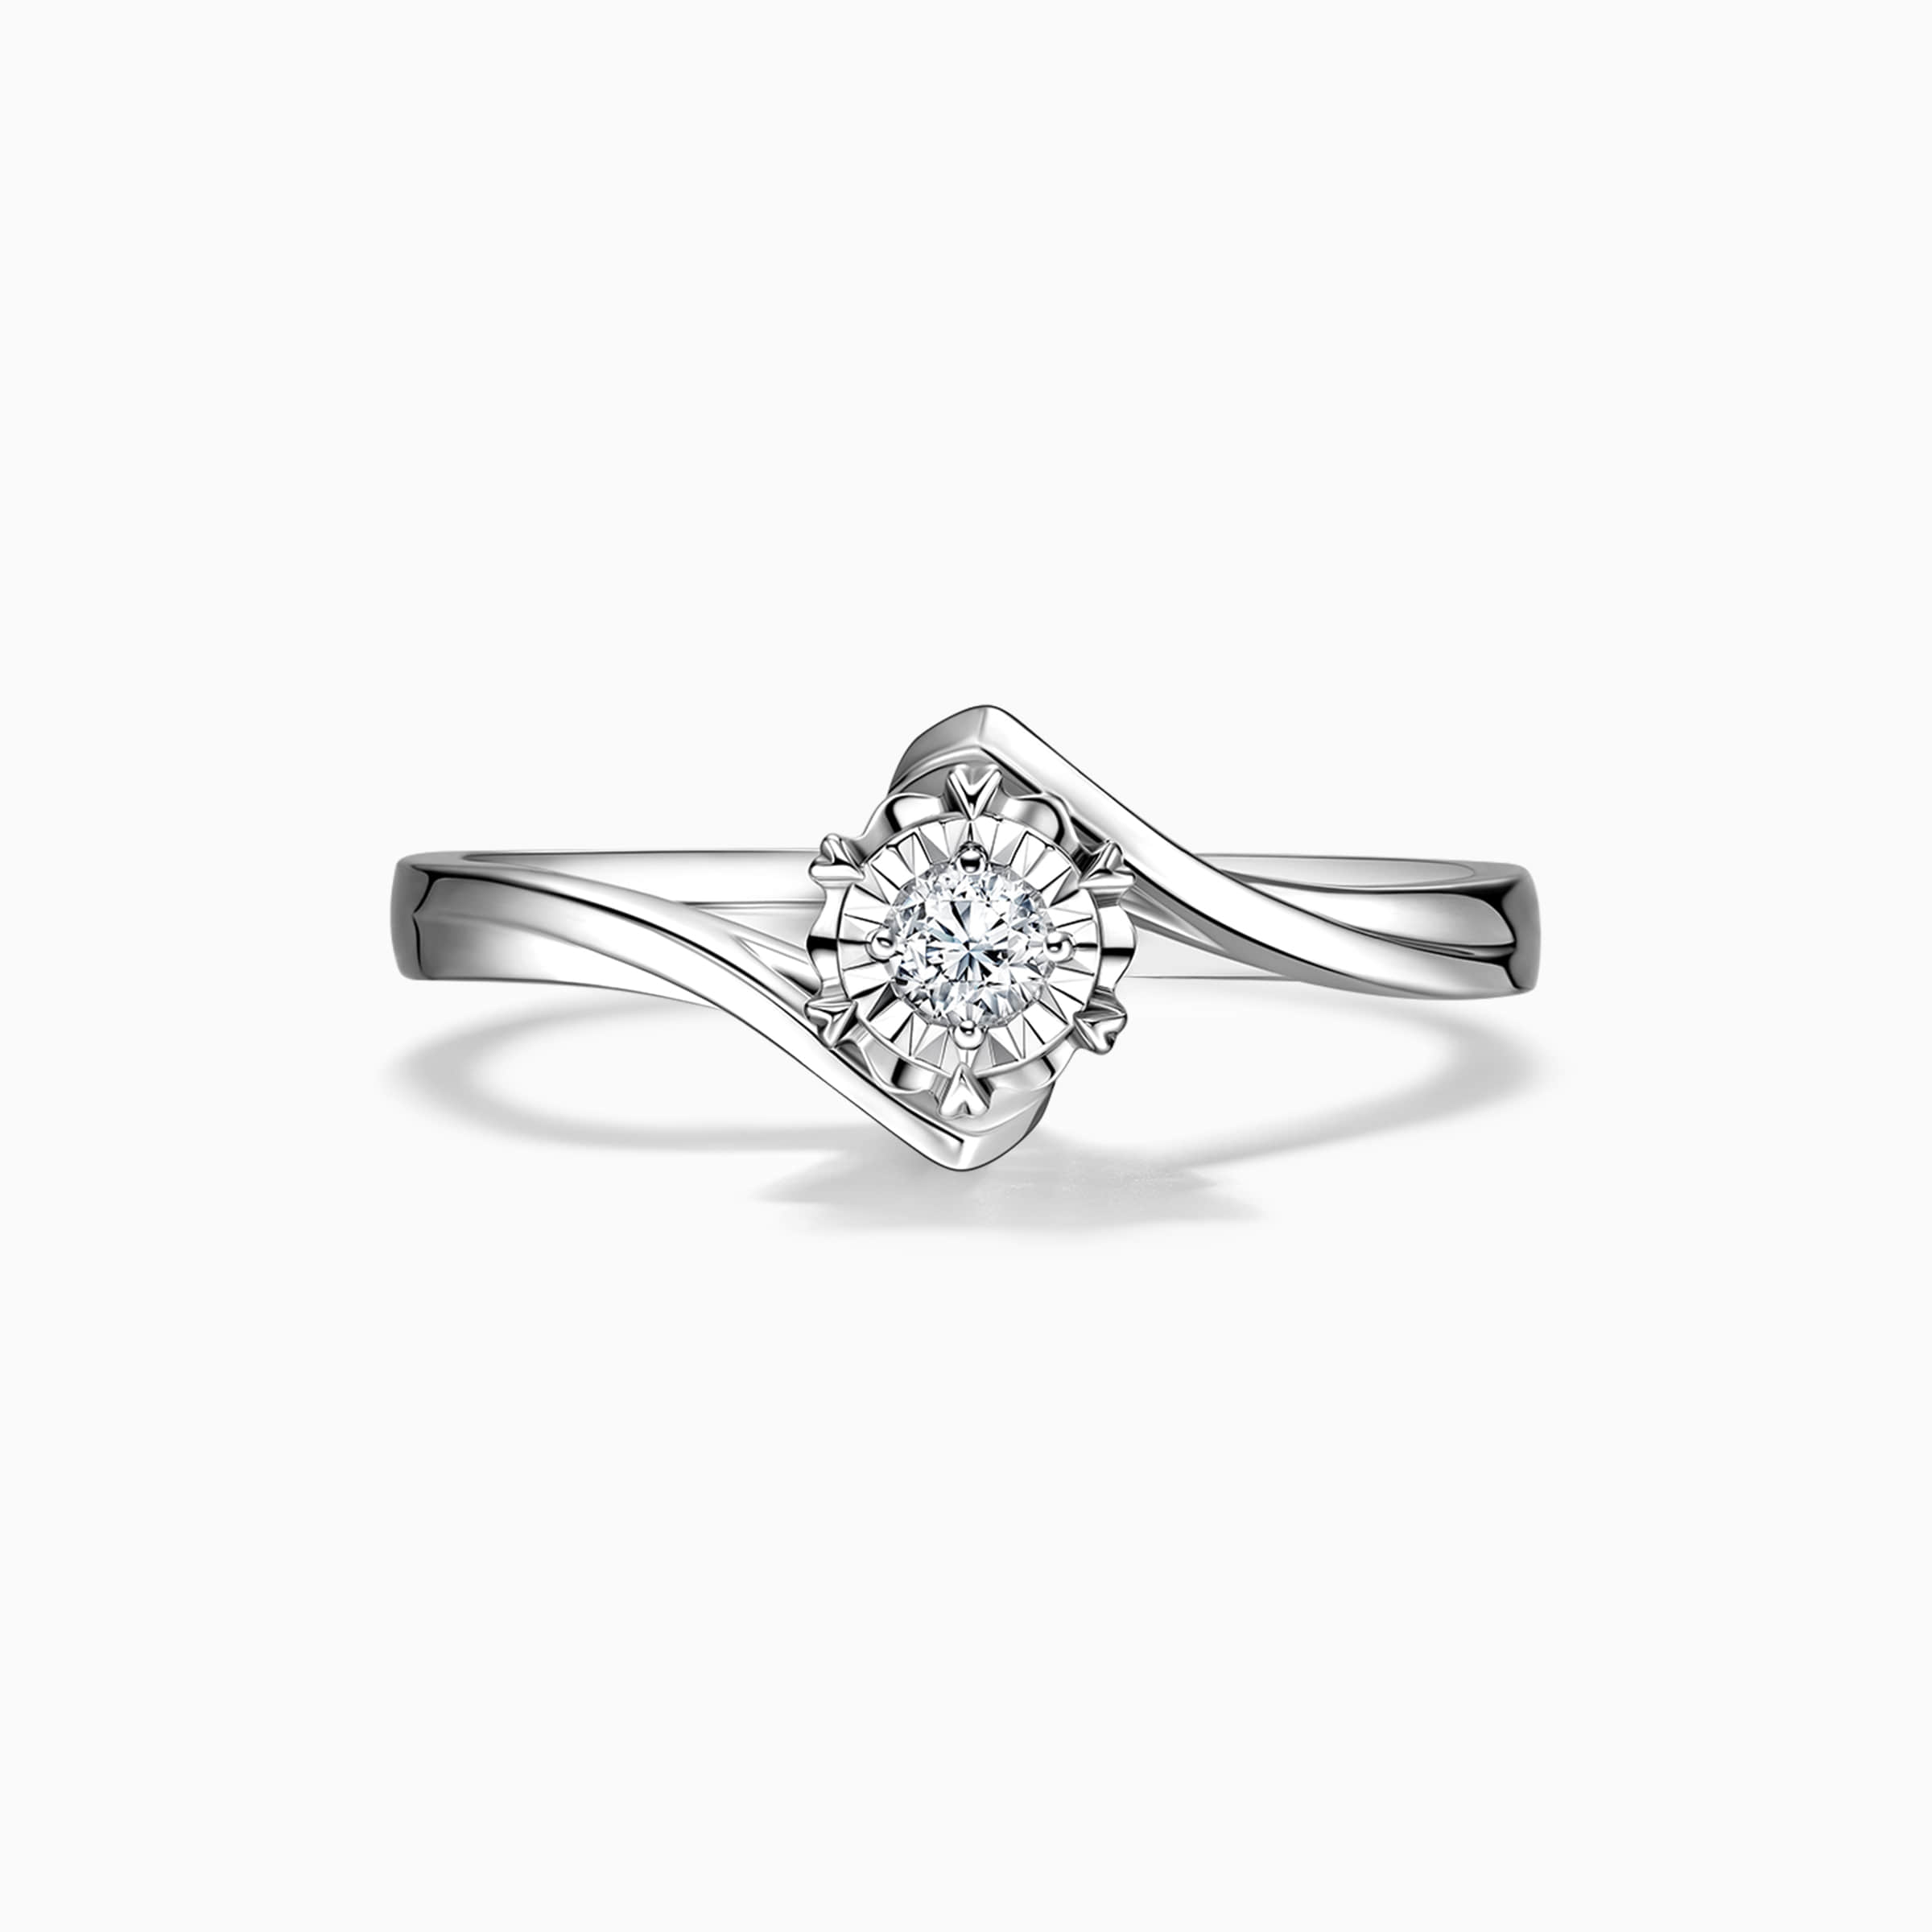 Darry Ring flower diamond promise ring front view